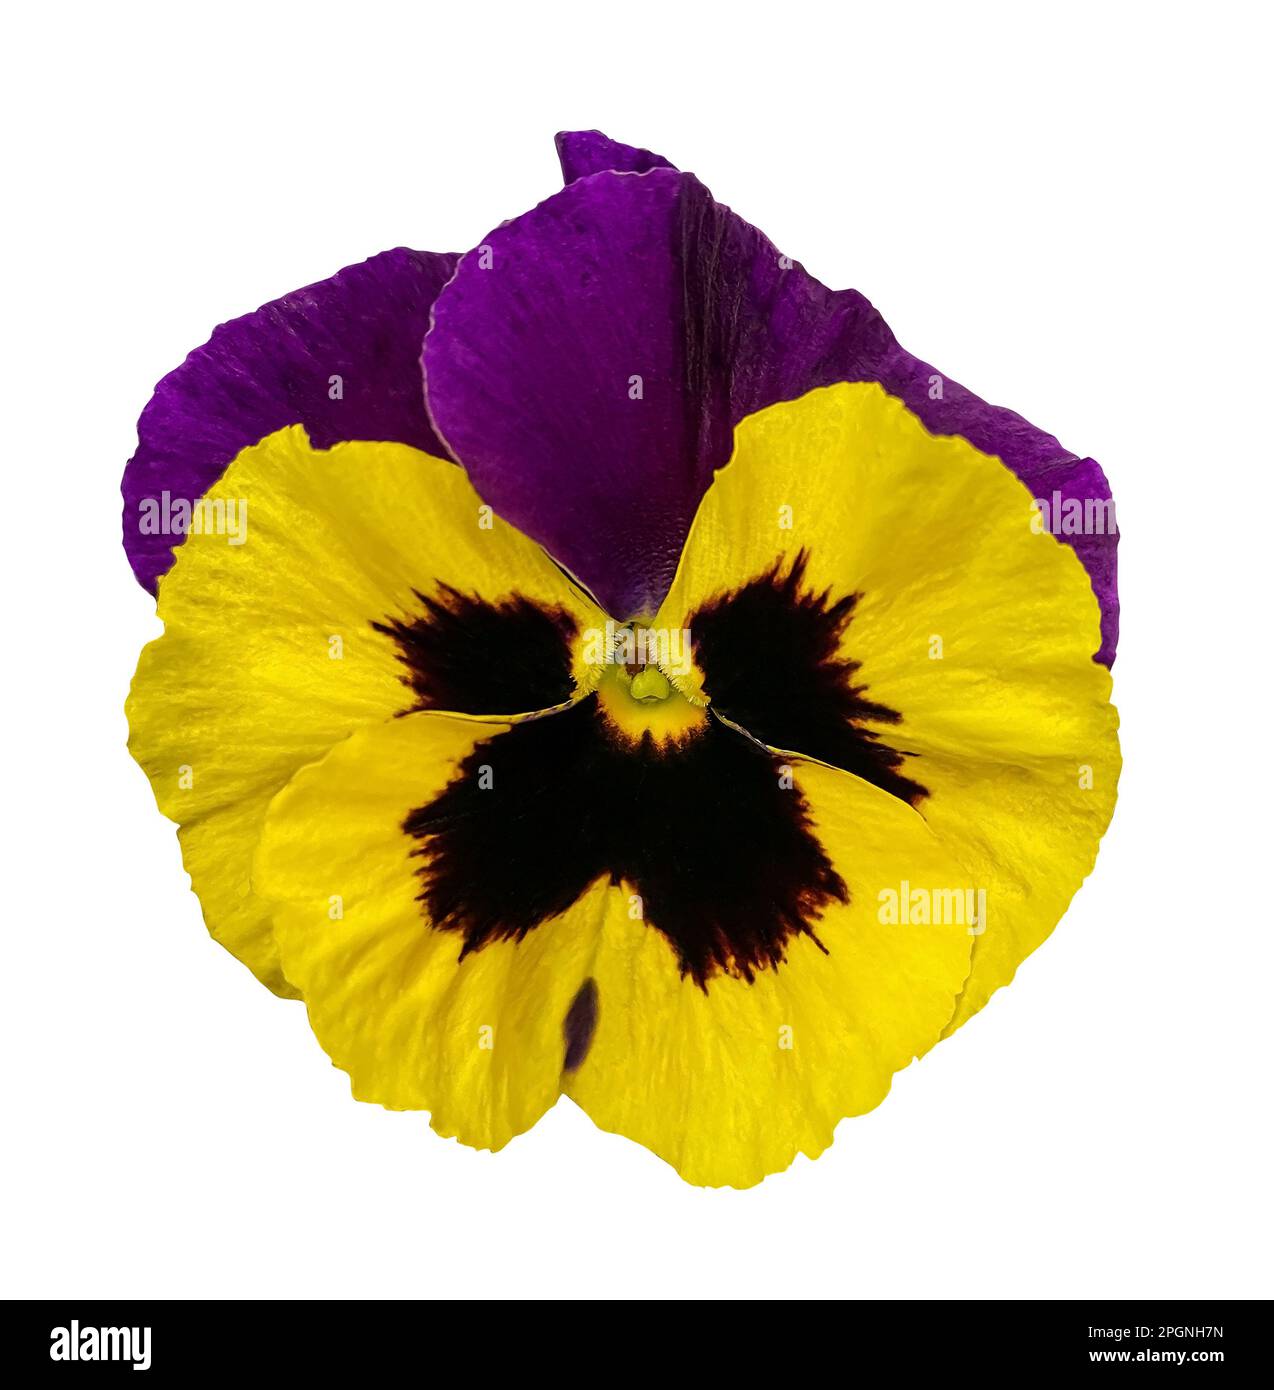 Purple and Yellow Colored Pansy Flower Isolated on White Background. Blooming Viola wirttrockiana plants cut out element for design. Close-up Object w Stock Photo